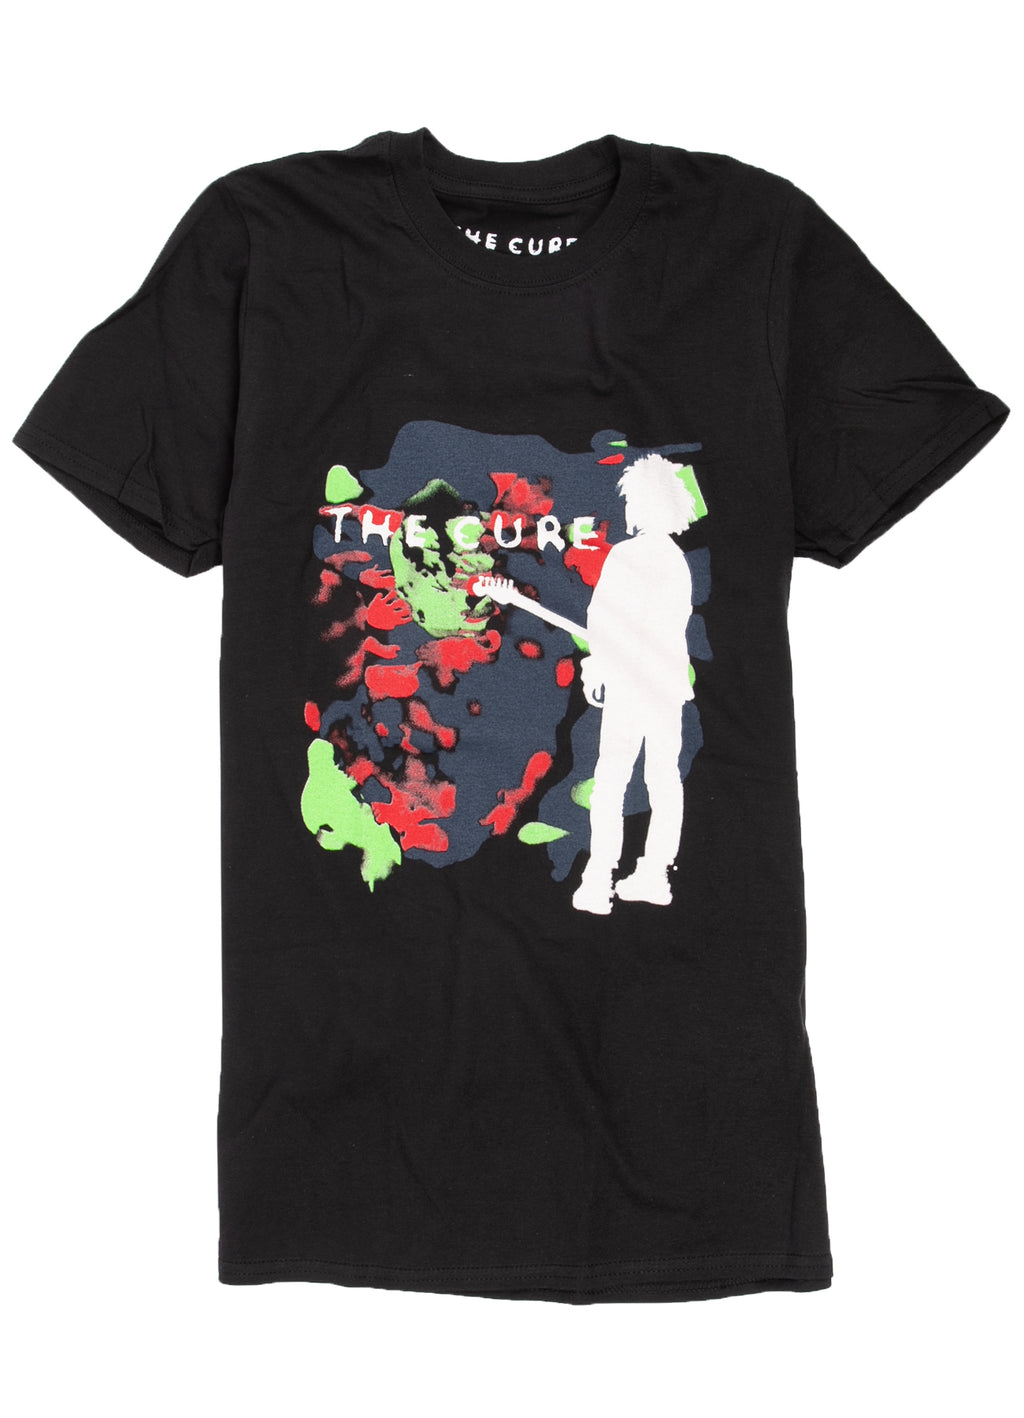 The Cure "Boys Don't Cry" t-shirt in multicolor print.